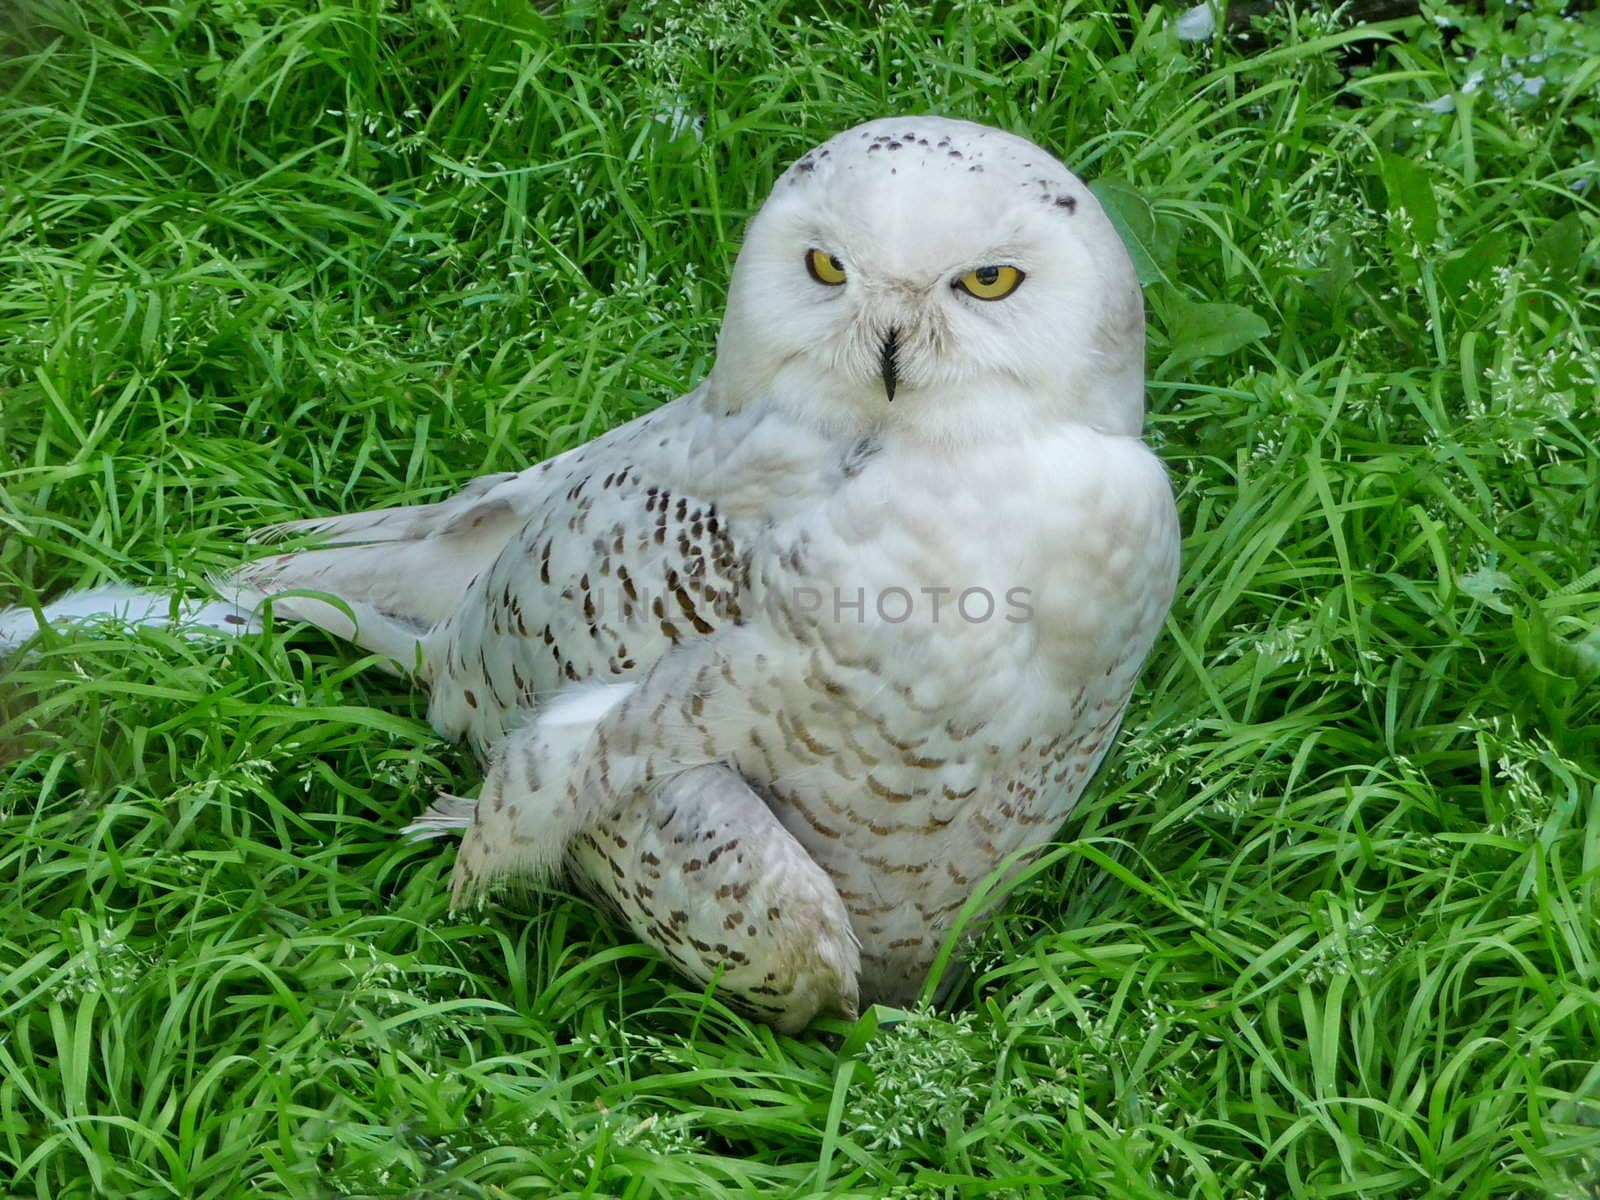 Owl on grass by tomatto